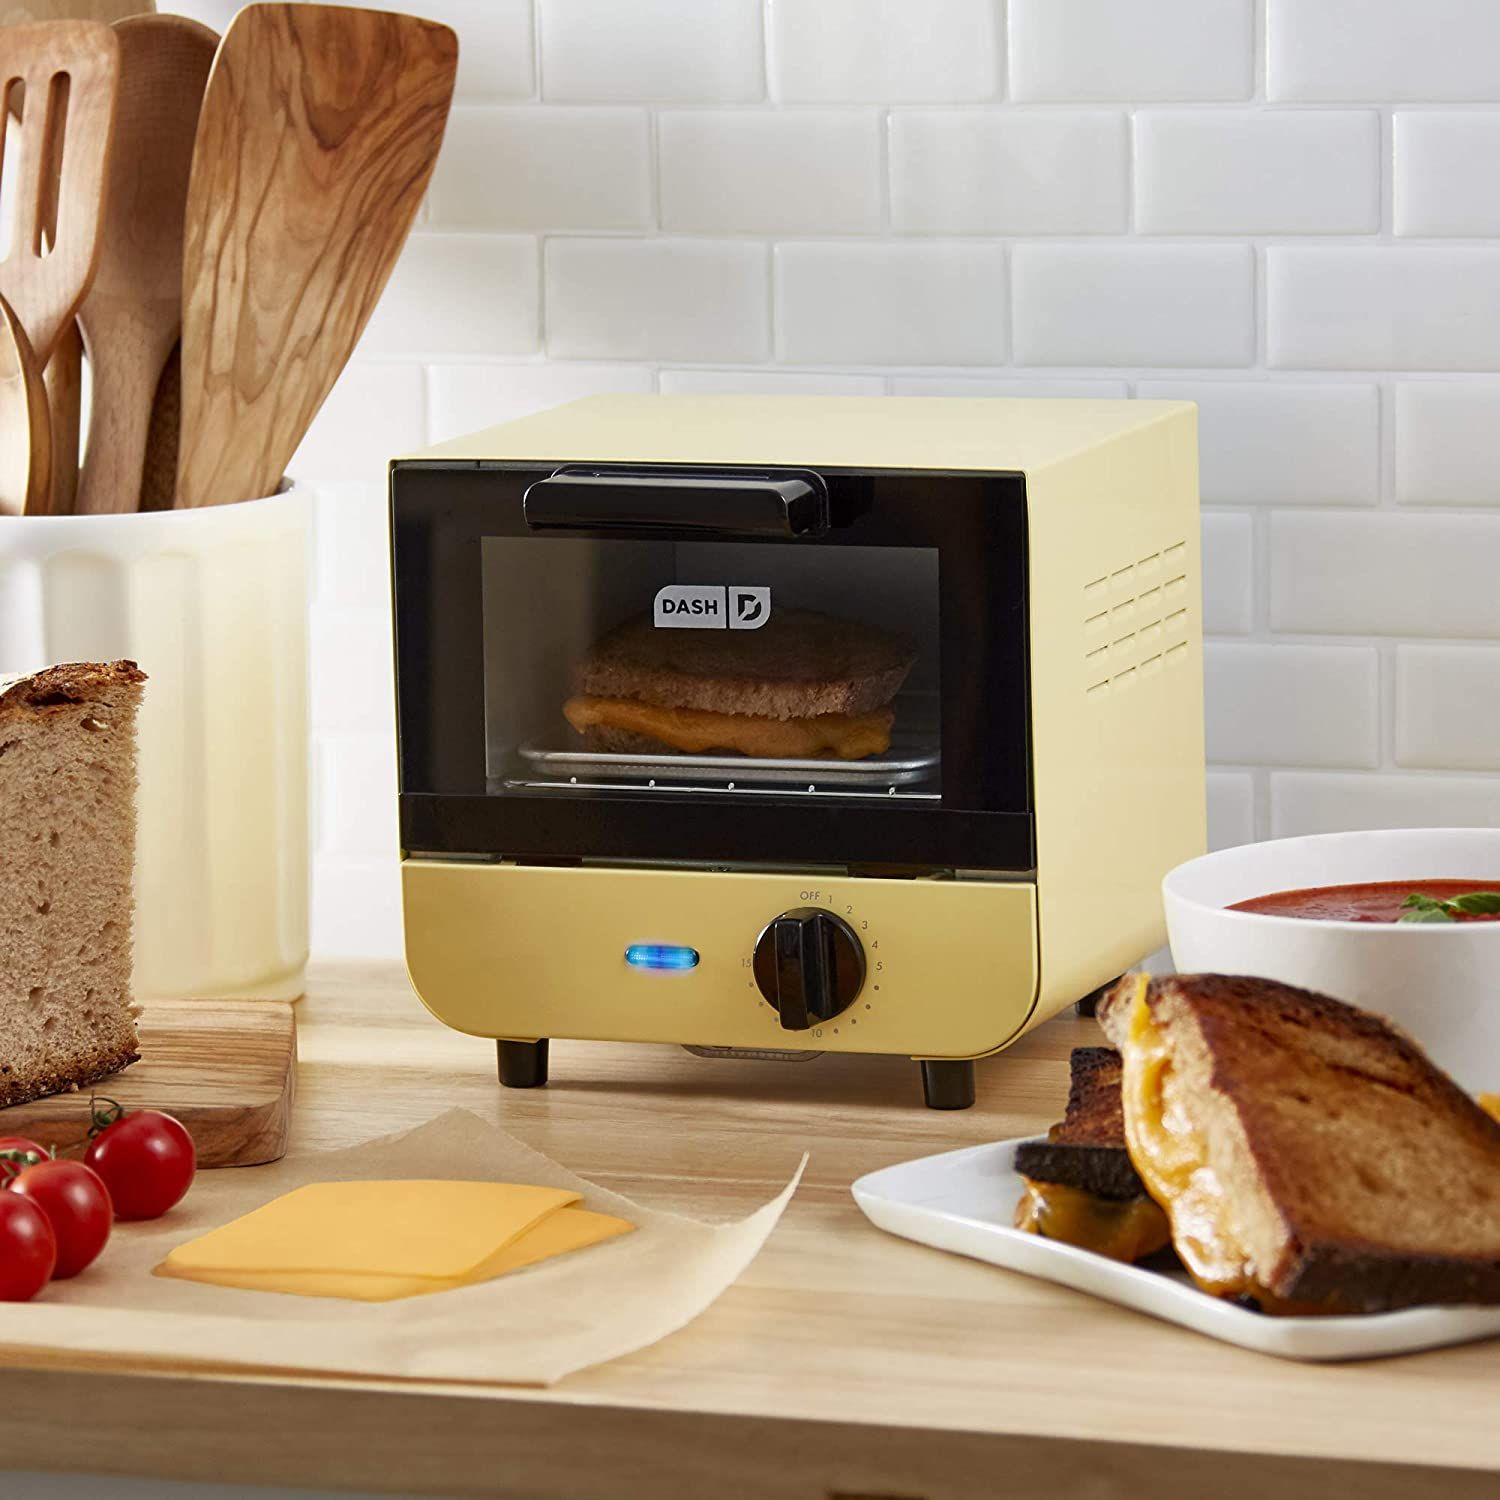 Cooking An Egg In A Dash Mini Toaster Oven 